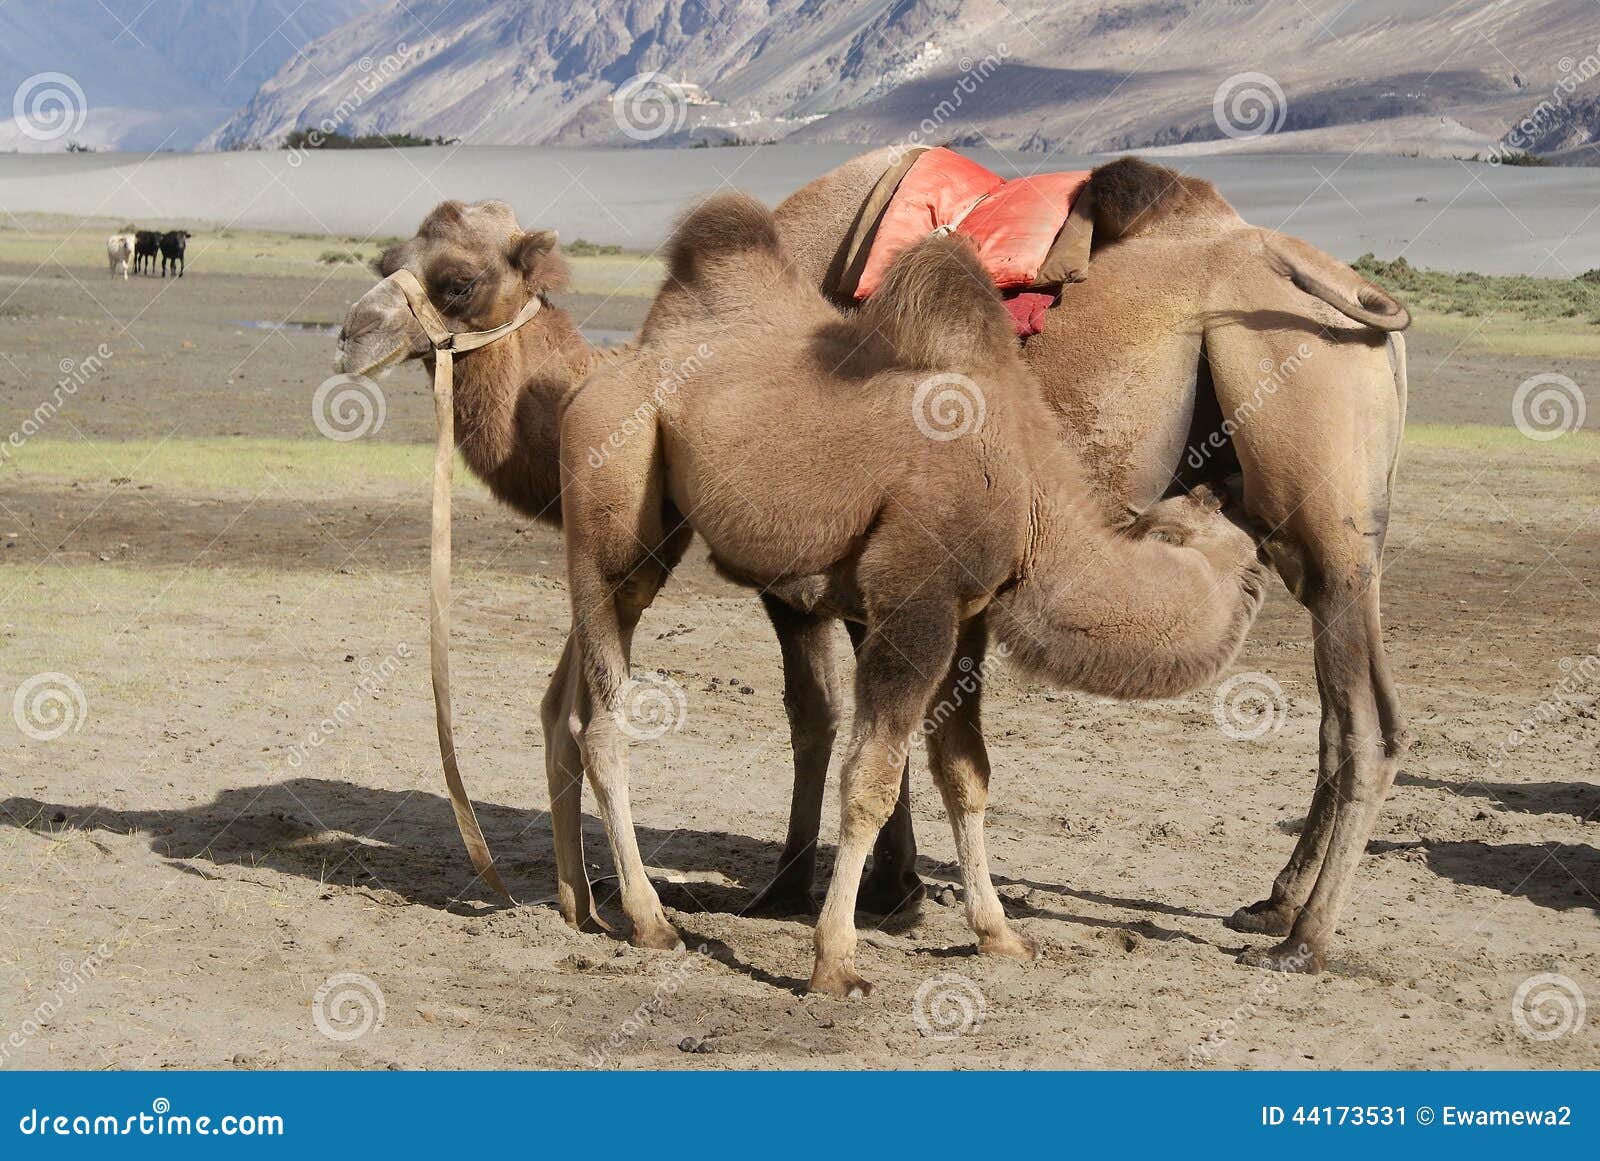 mother and baby bactrian camel in desert nubra valley